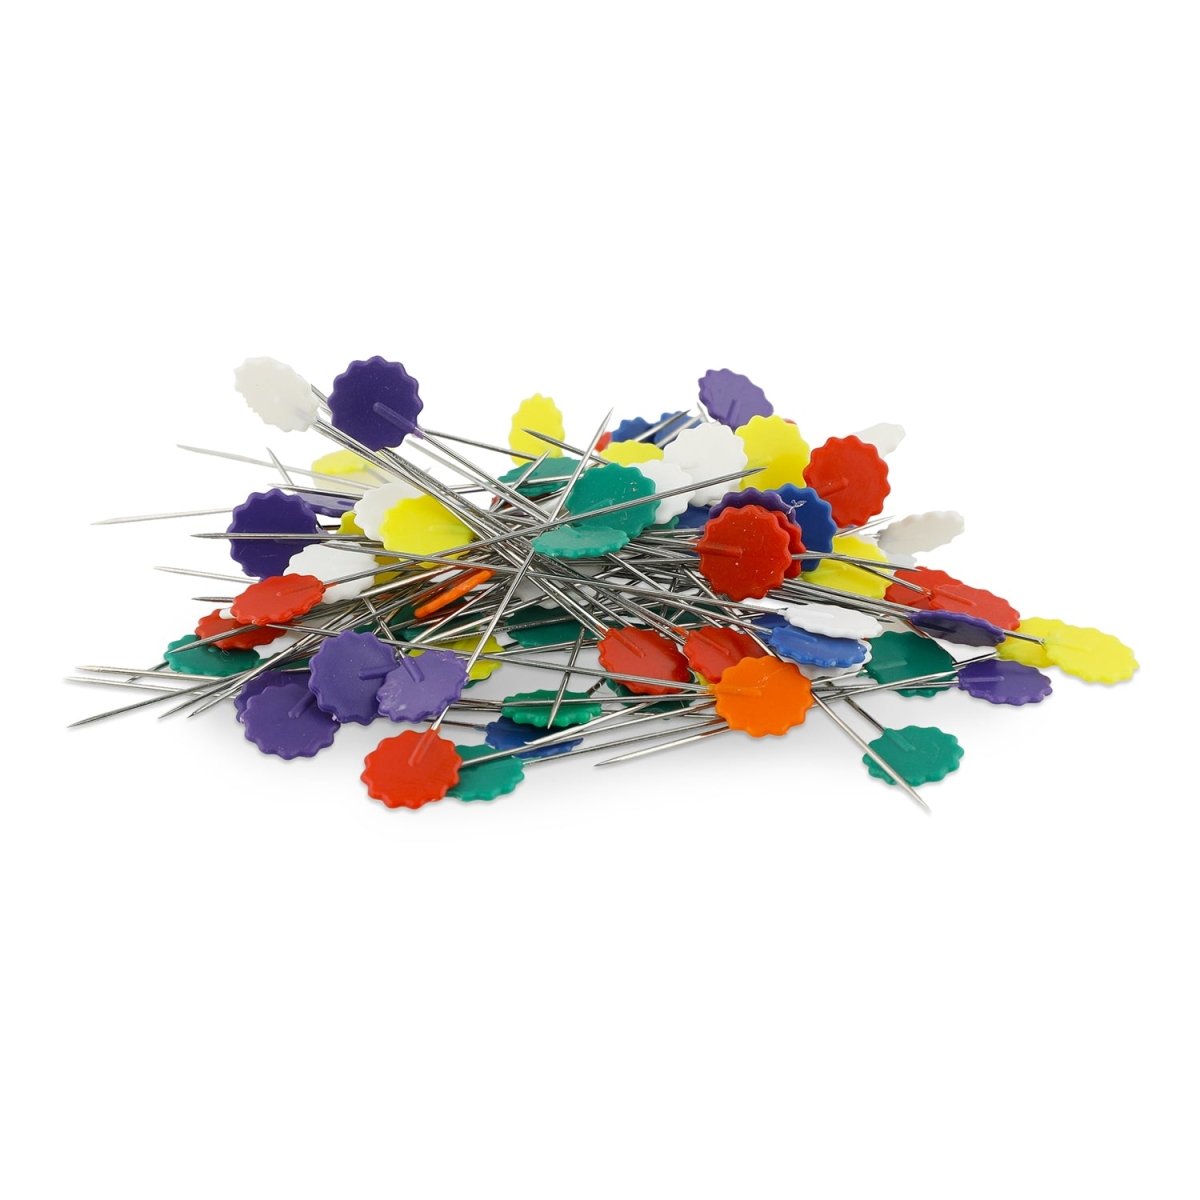 A pile of colorful Long Flower Pins.